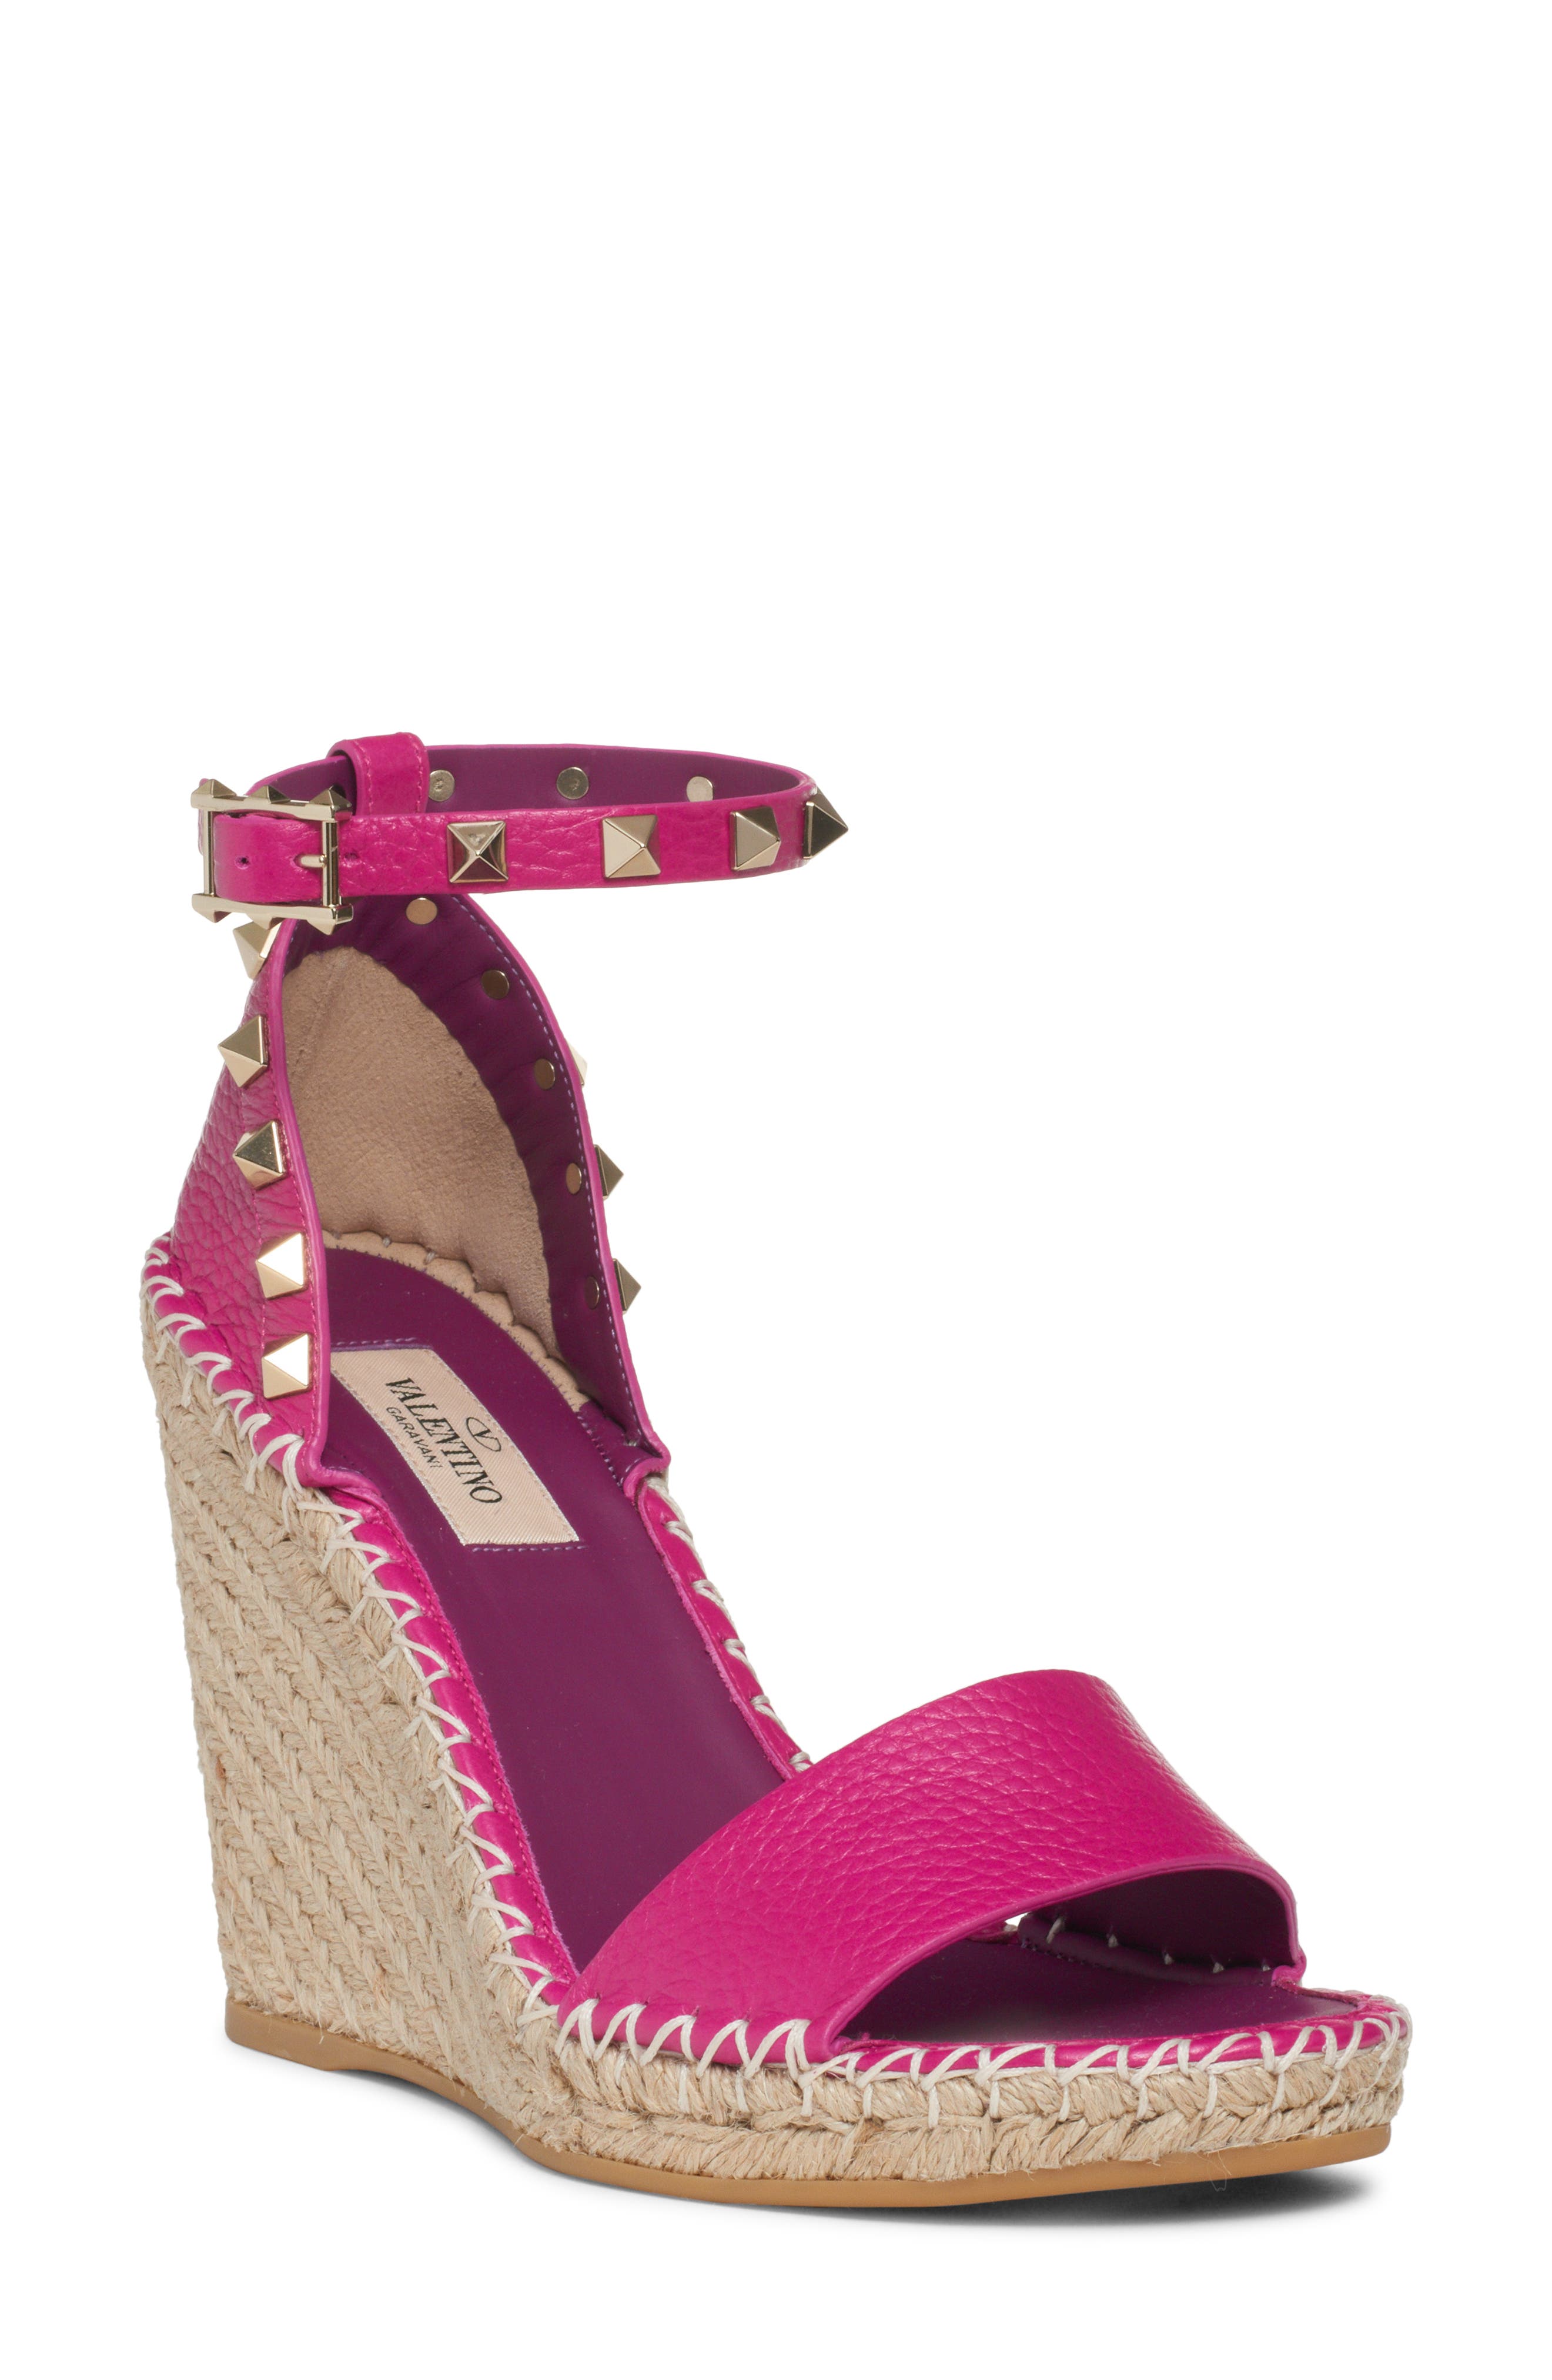 Lugano Espadrille Wedge Sandal in Light Pink Fabric at Nordstrom Nordstrom Women Shoes High Heels Wedges Wedge Sandals 